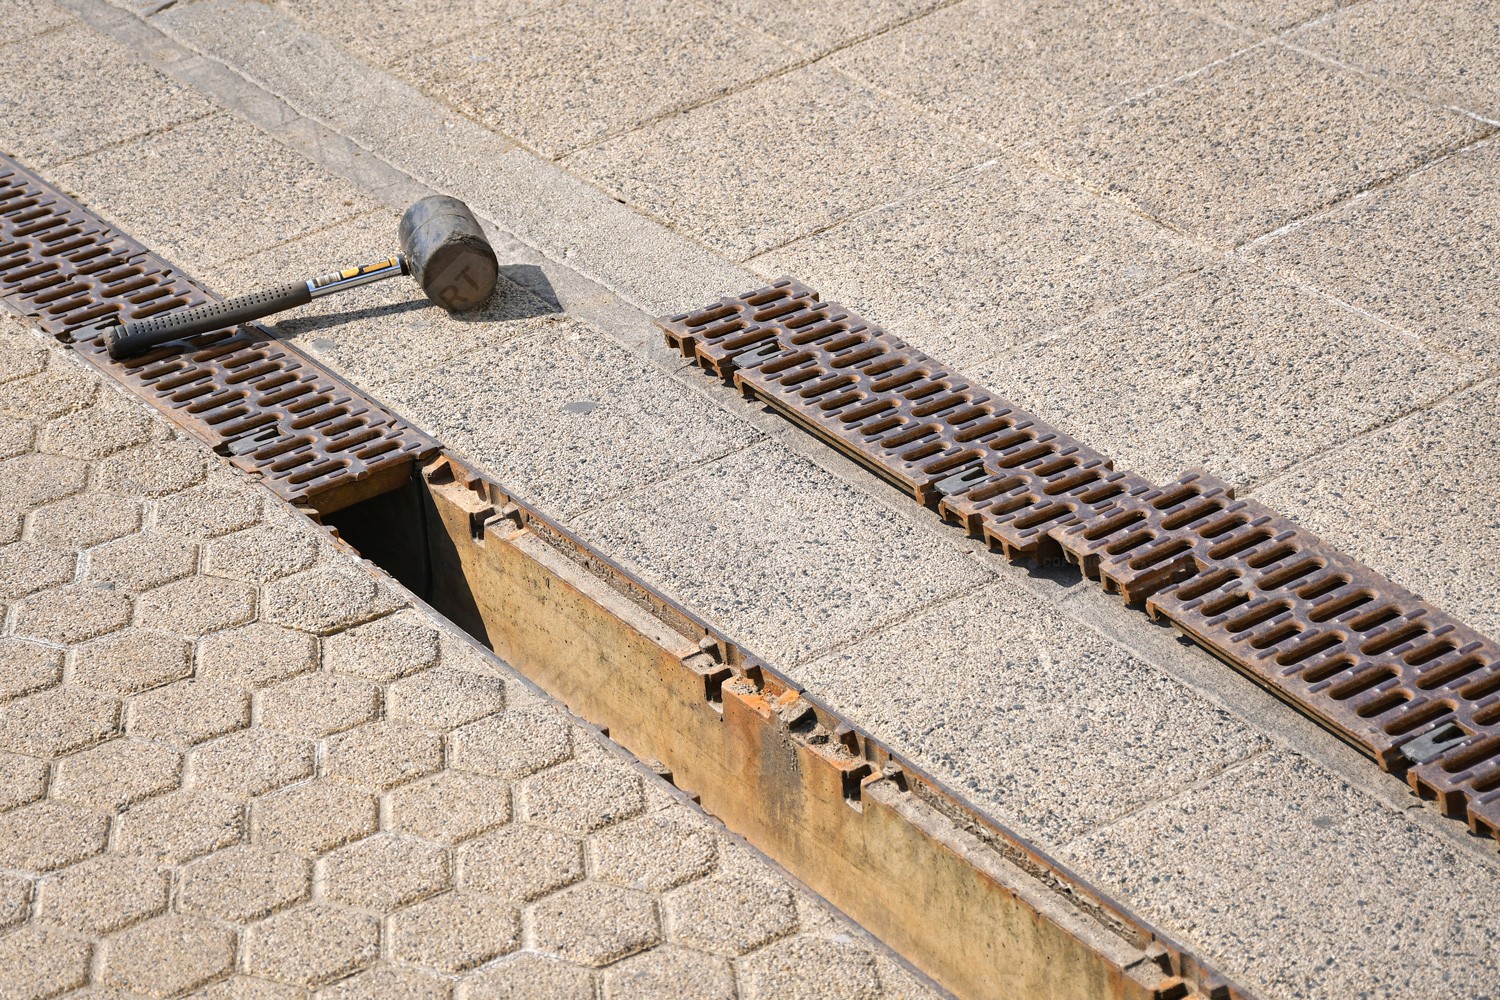 Drainage Channel With Grating Removed For maintenance Work